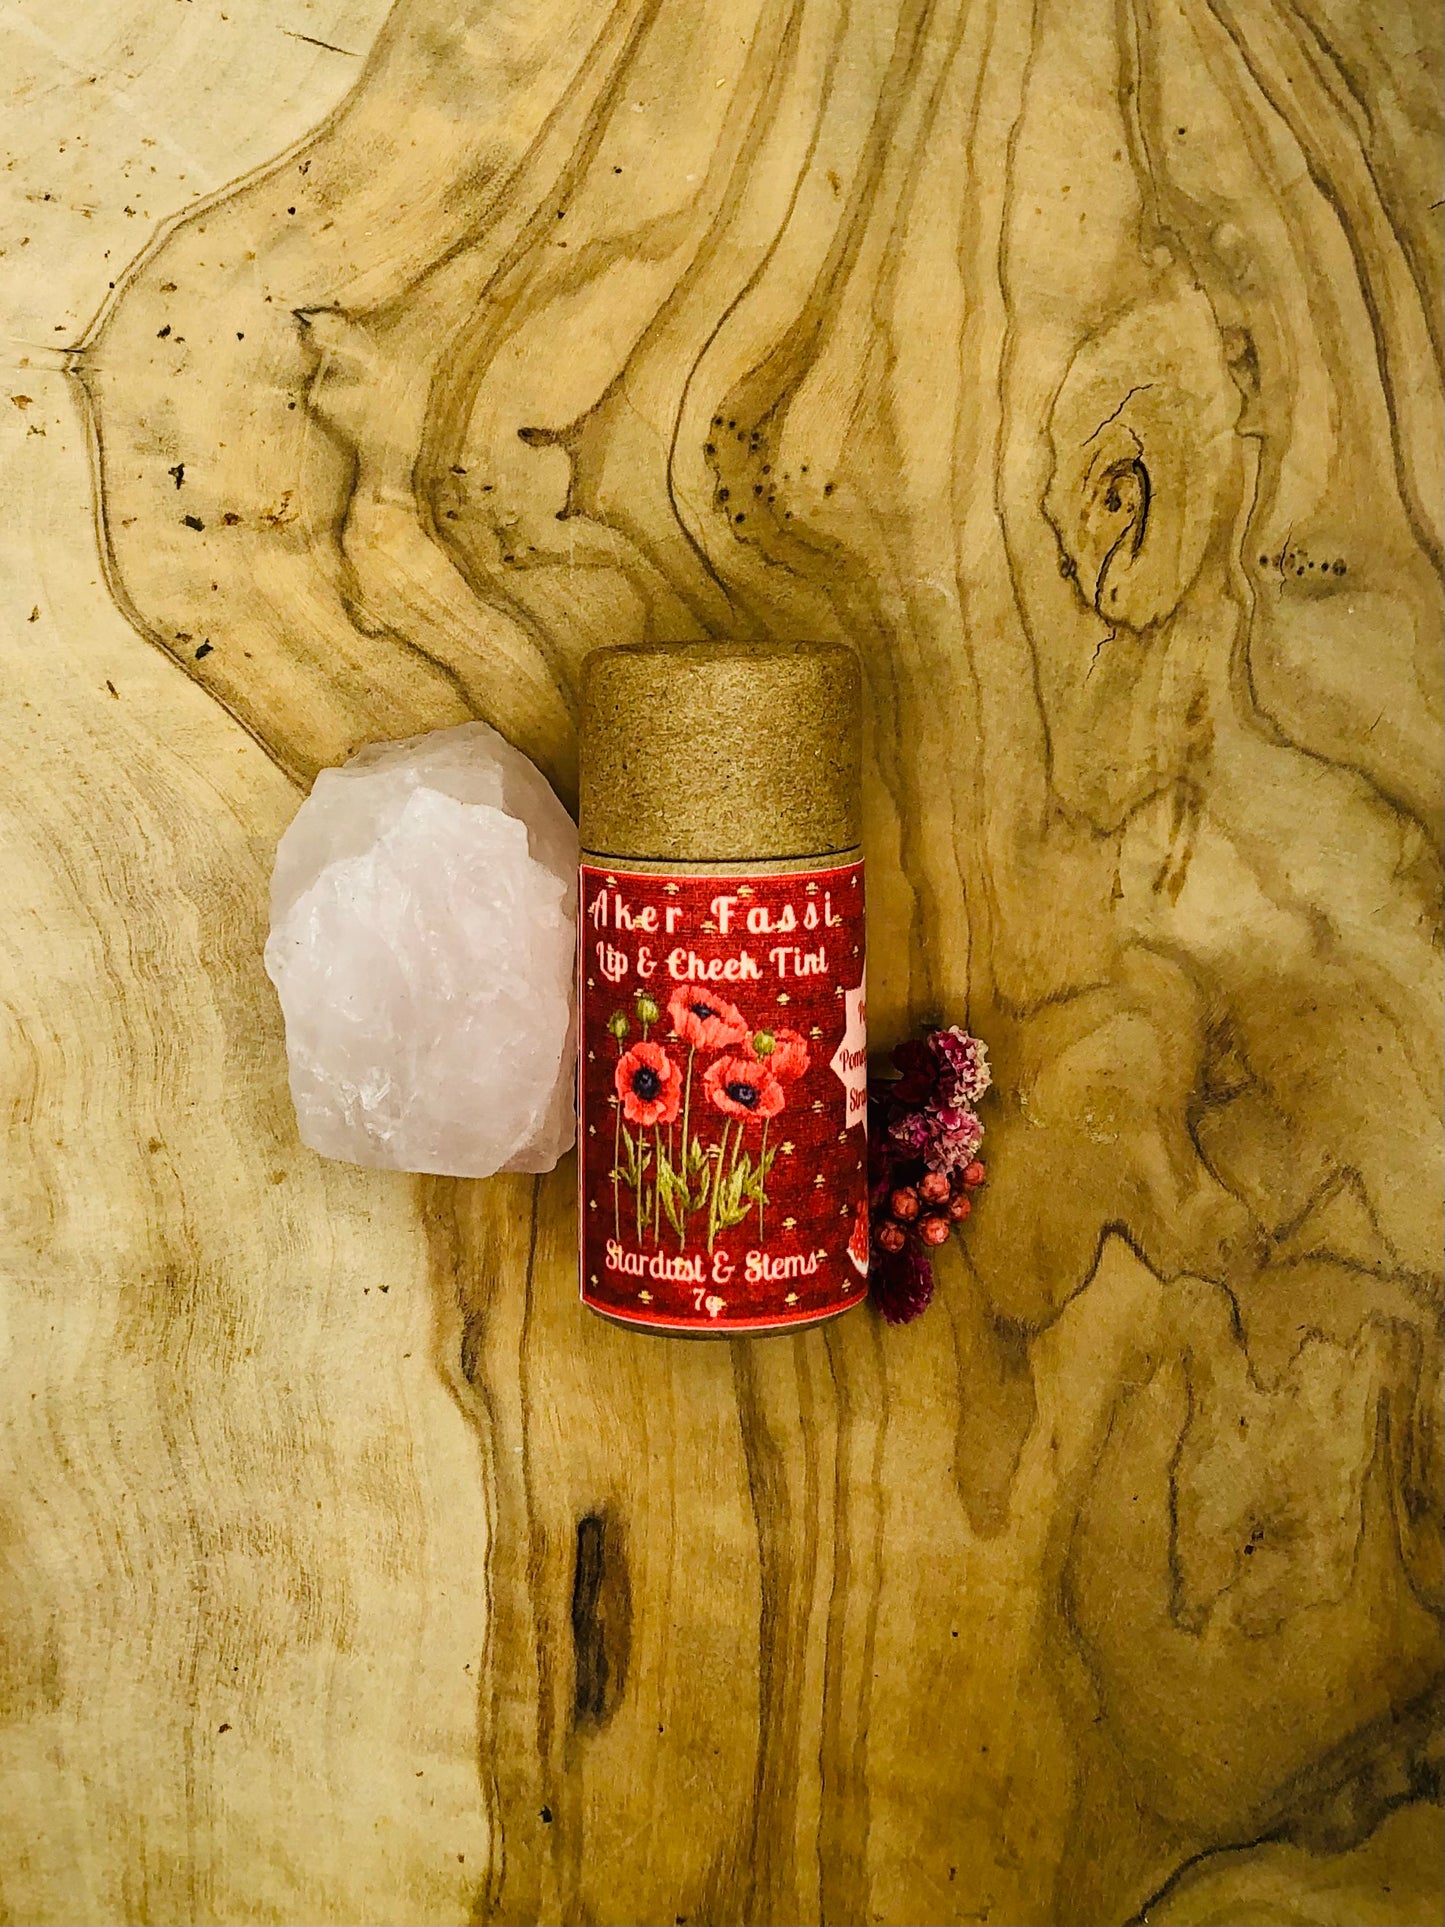 Aker Fassi Moroccan Lip & Cheek Tint: Natural Color from Pomegranate & Poppy Flowers, Sweetly Scented with Real Strawberry